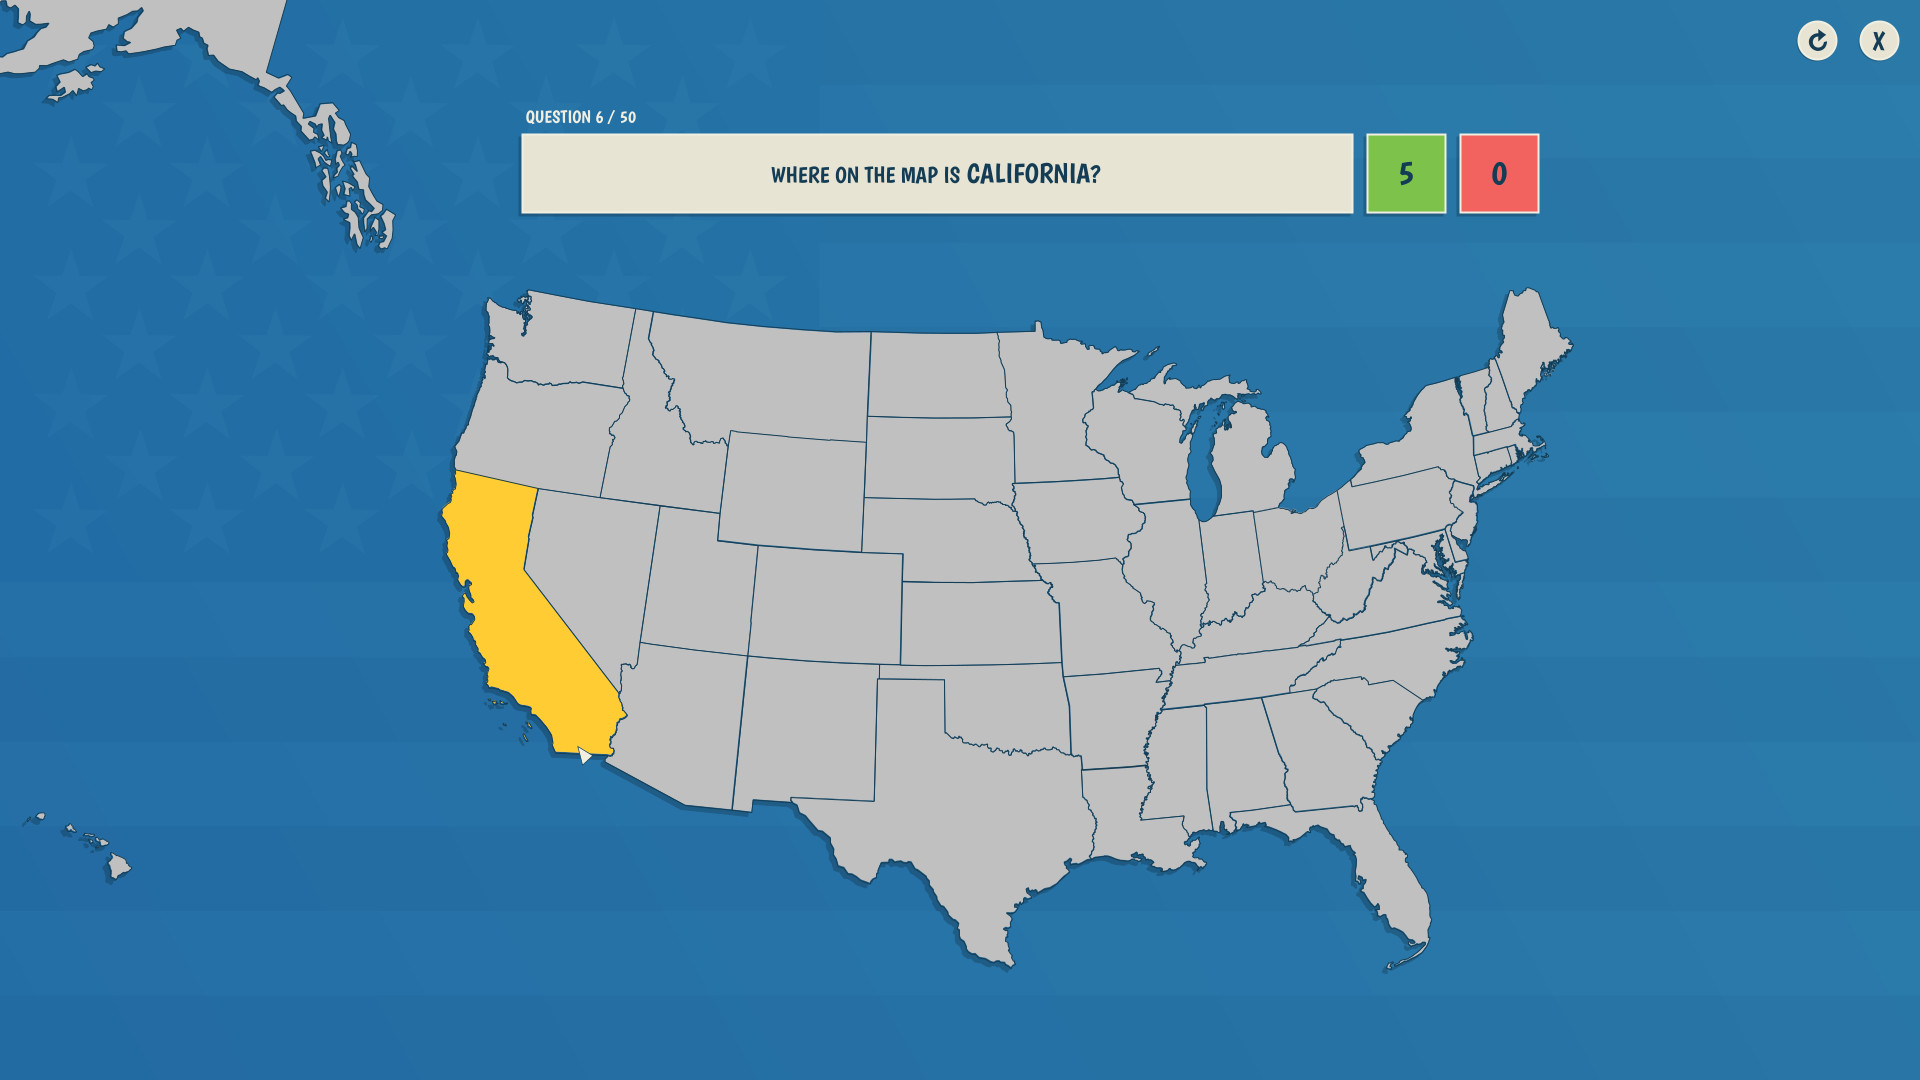 State quiz. USA 50 States game. Us States Quiz. USA Map Quiz game. California on the Map of the USA.